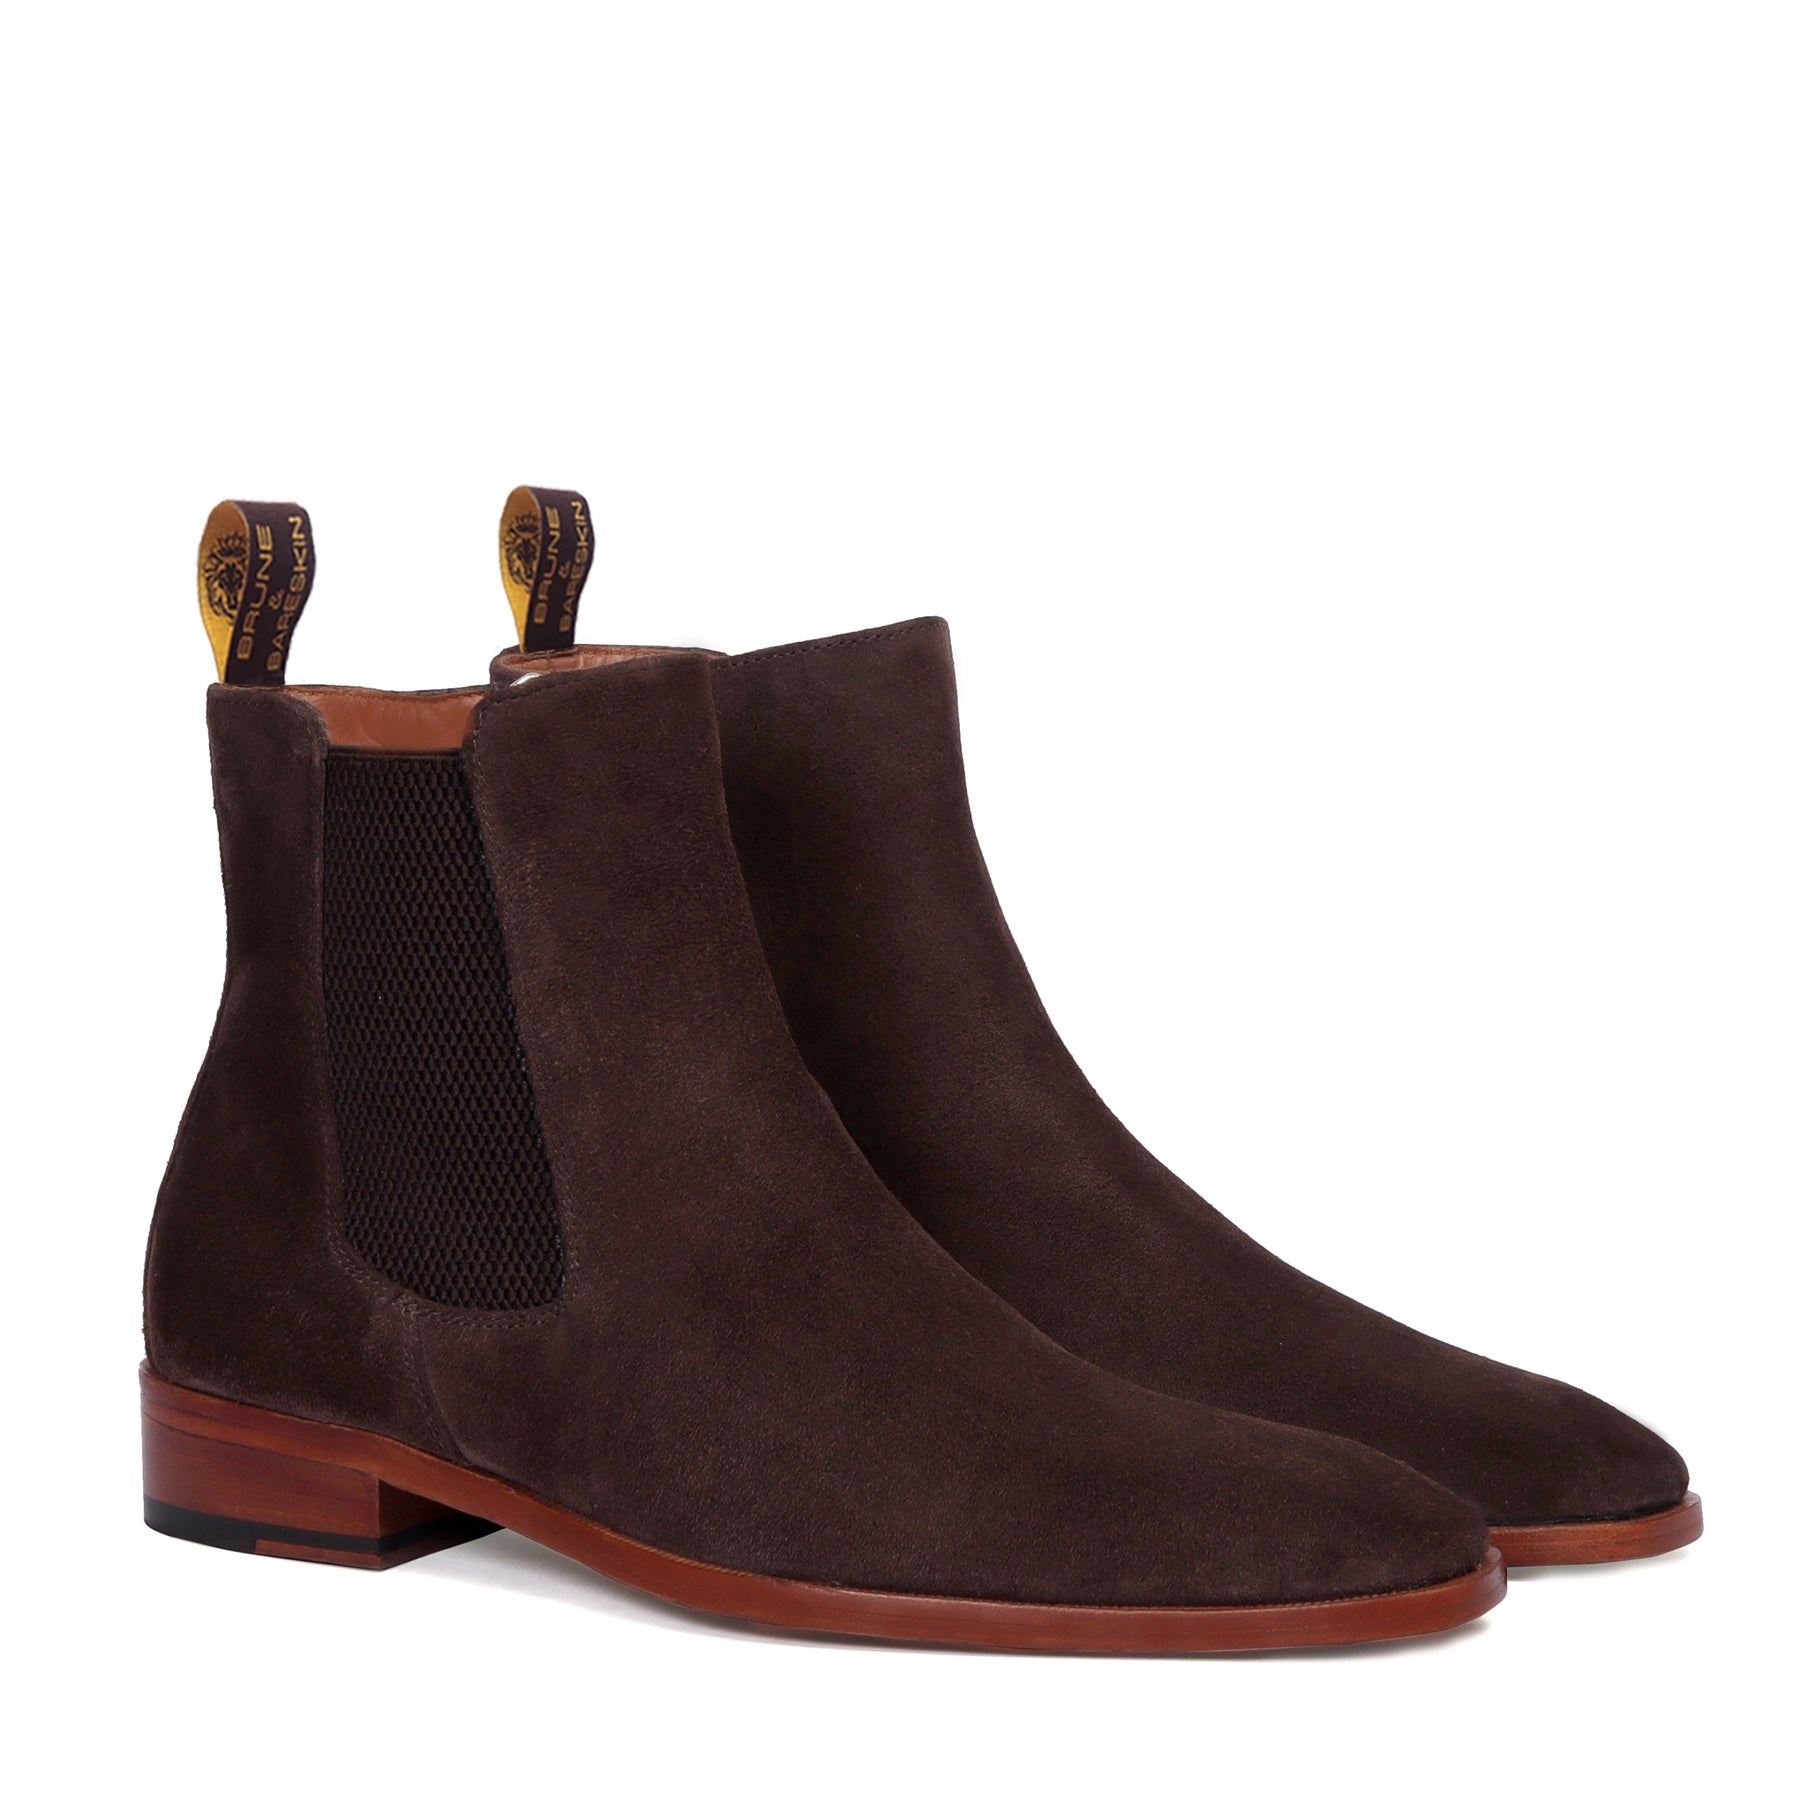 Suede Leather Chelsea Boots Iin Dark Brown Suede Leather With Leather Sole By Brune & Bareskin